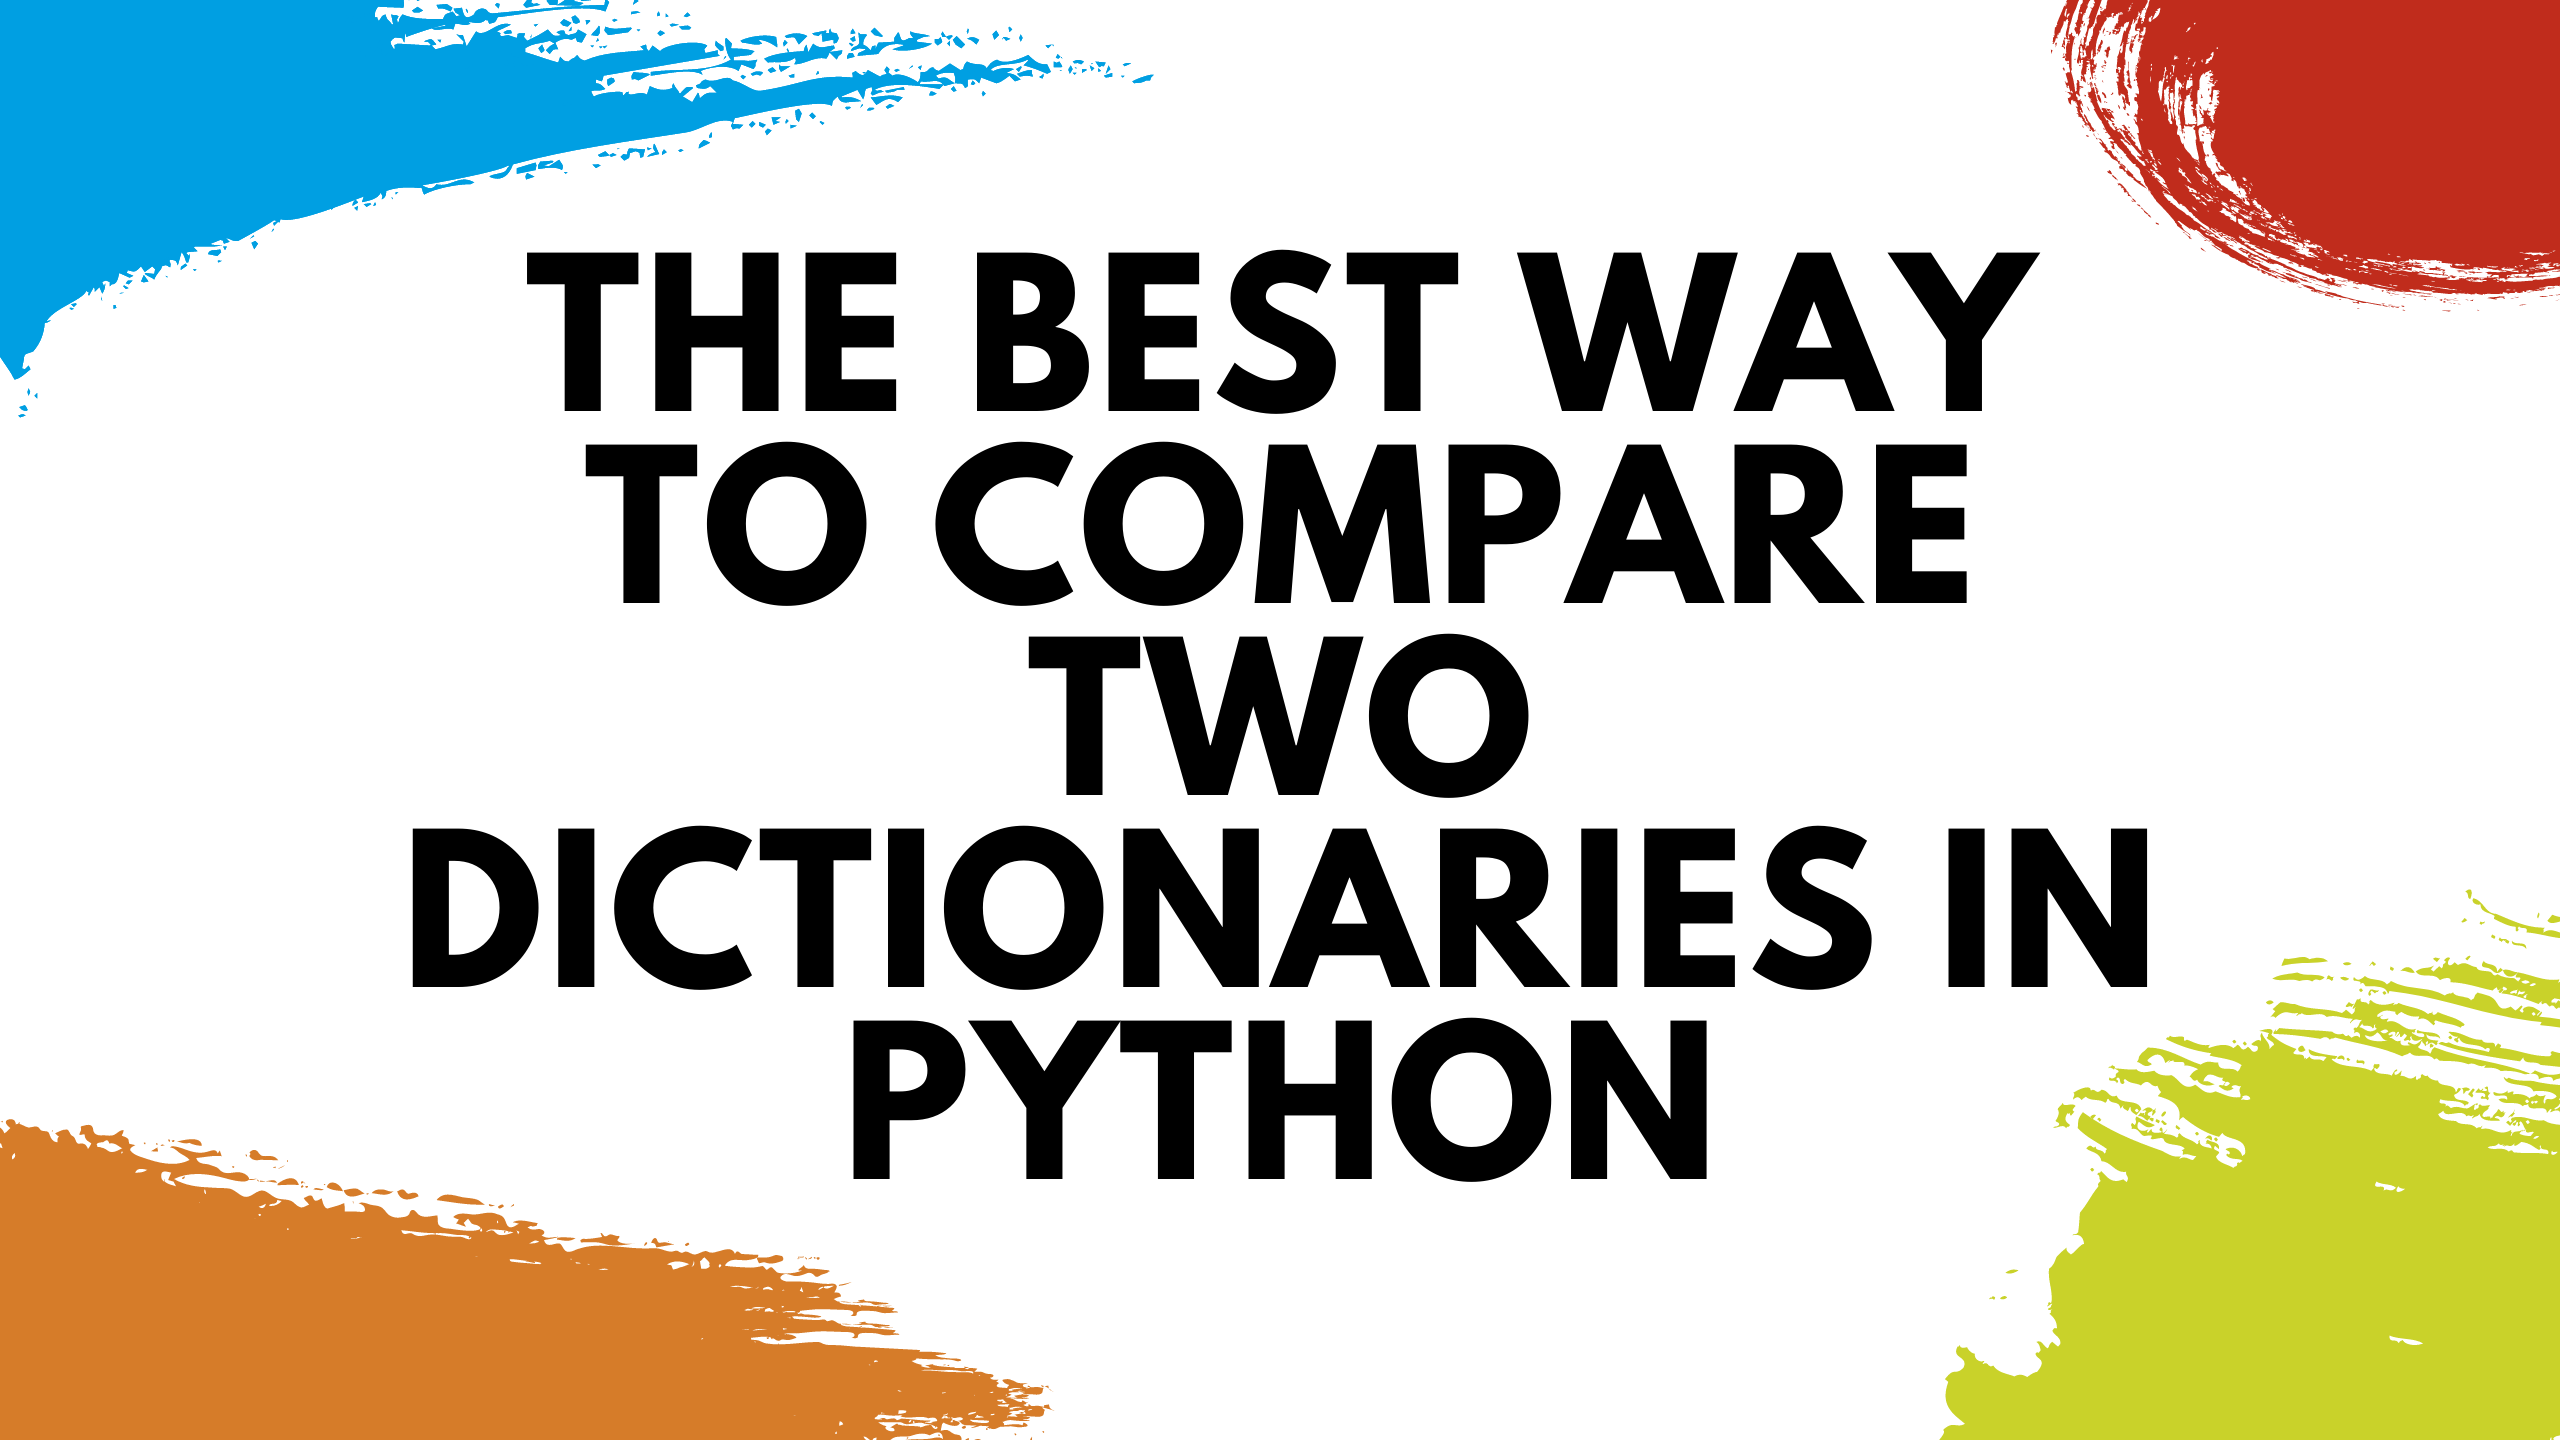 The Best Way To Compare Two Dictionaries In Python